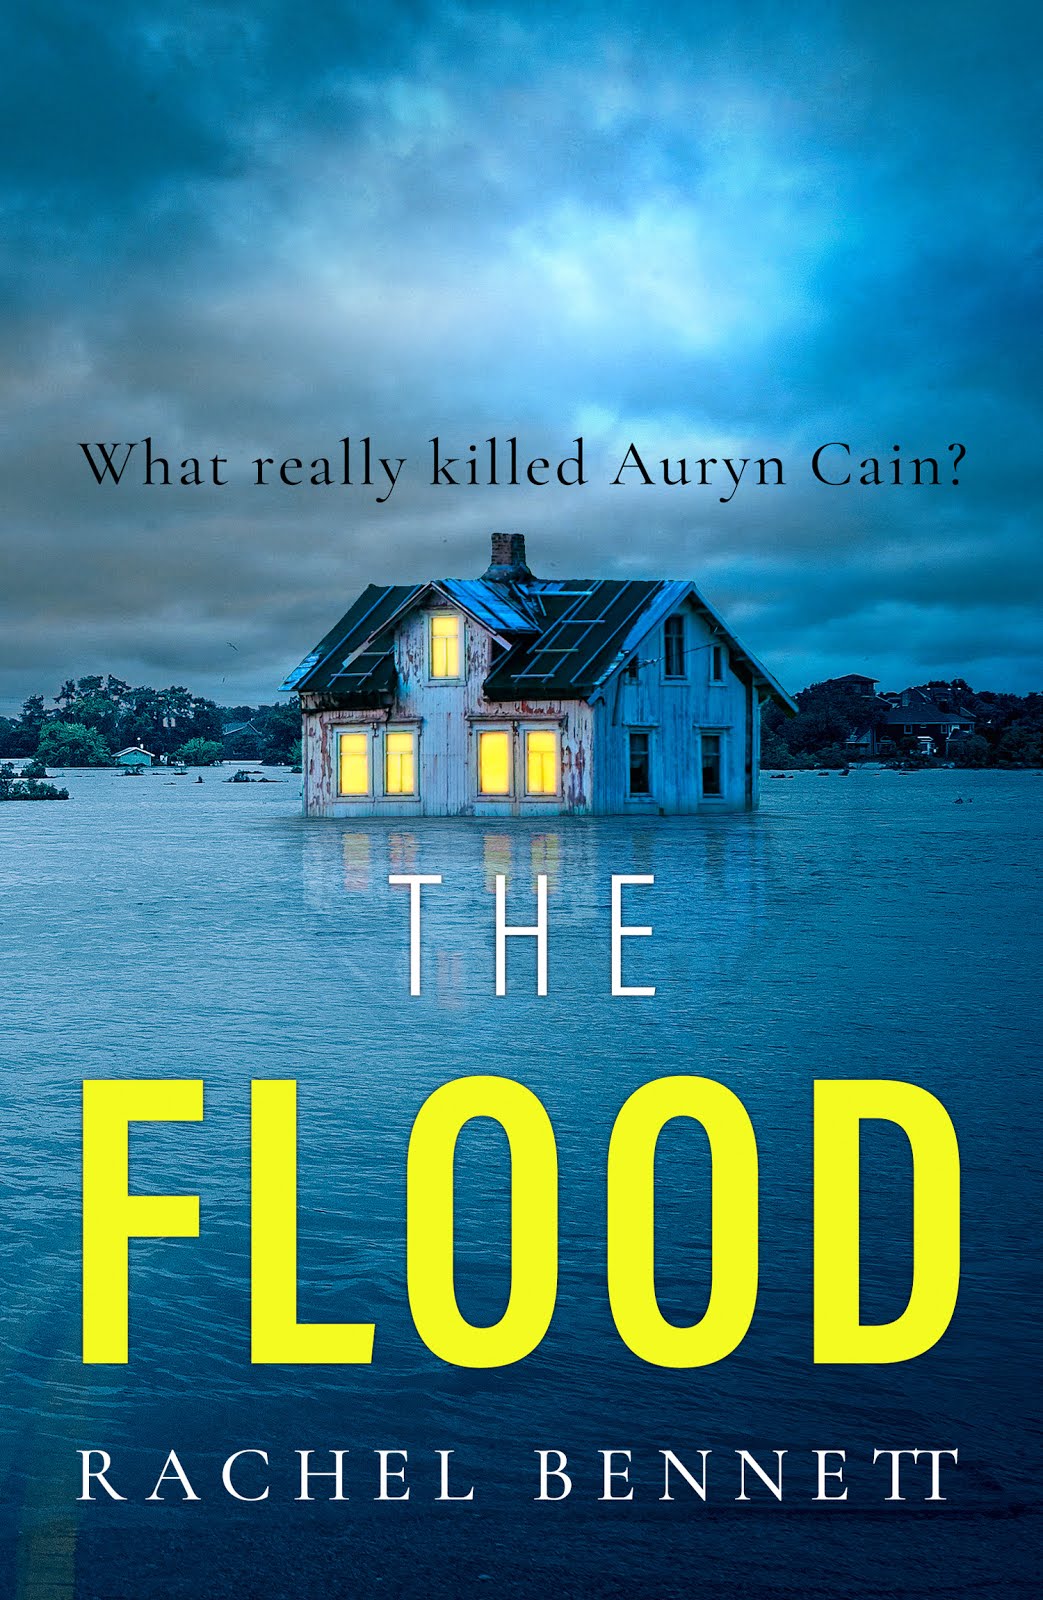 THE FLOOD - out now on Kindle and Paperback from One More Chapter!